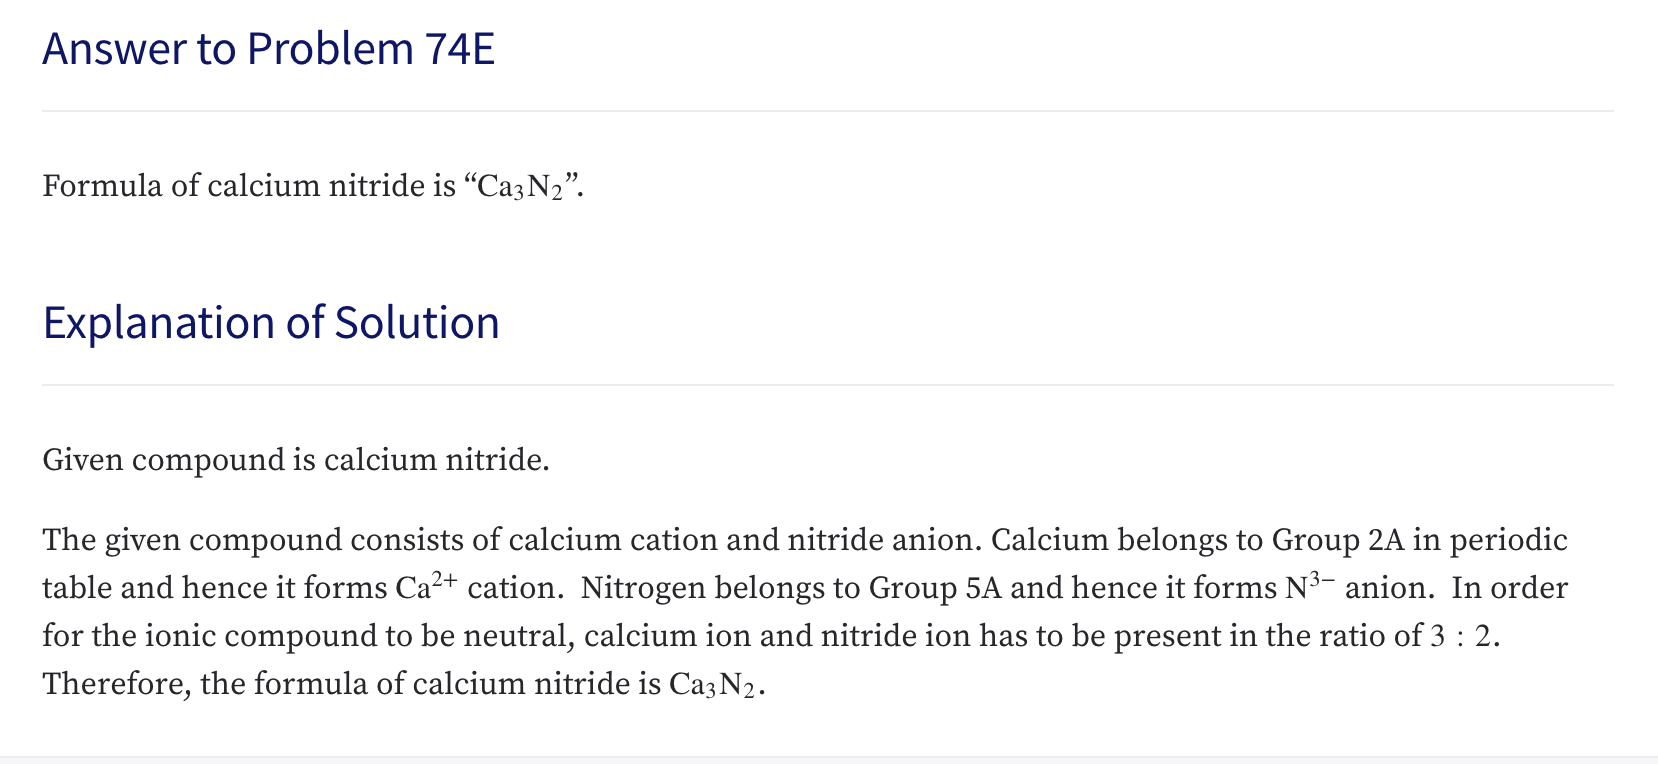 Formula of calcium nitride is "Caz N2".
Explanation of Solution
Given compound is calcium nitride.
The given compound consists of calcium cation and nitride anion. Calcium belongs to Group 2A in periodic
table and hence it forms Ca2+ cation. Nitrogen belongs to Group 5A and hence it forms N3- anion. In order
for the ionic compound to be neutral, calcium ion and nitride ion has to be present in the ratio of 3: 2.
Therefore, the formula of calcium nitride is Ca3N2.
